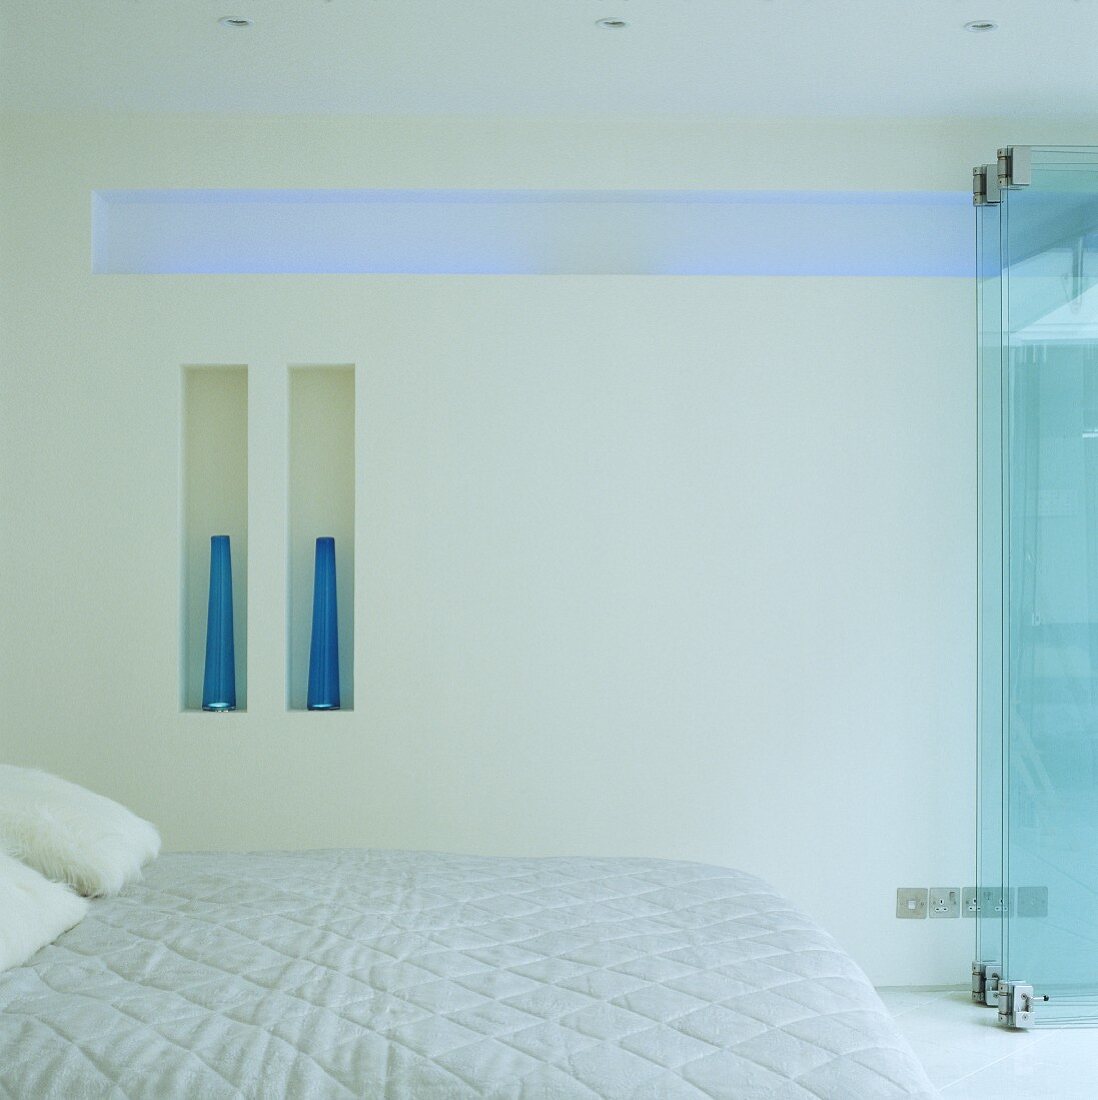 White bedroom with double bed and indirect blue lighting in a horizontal wall niche